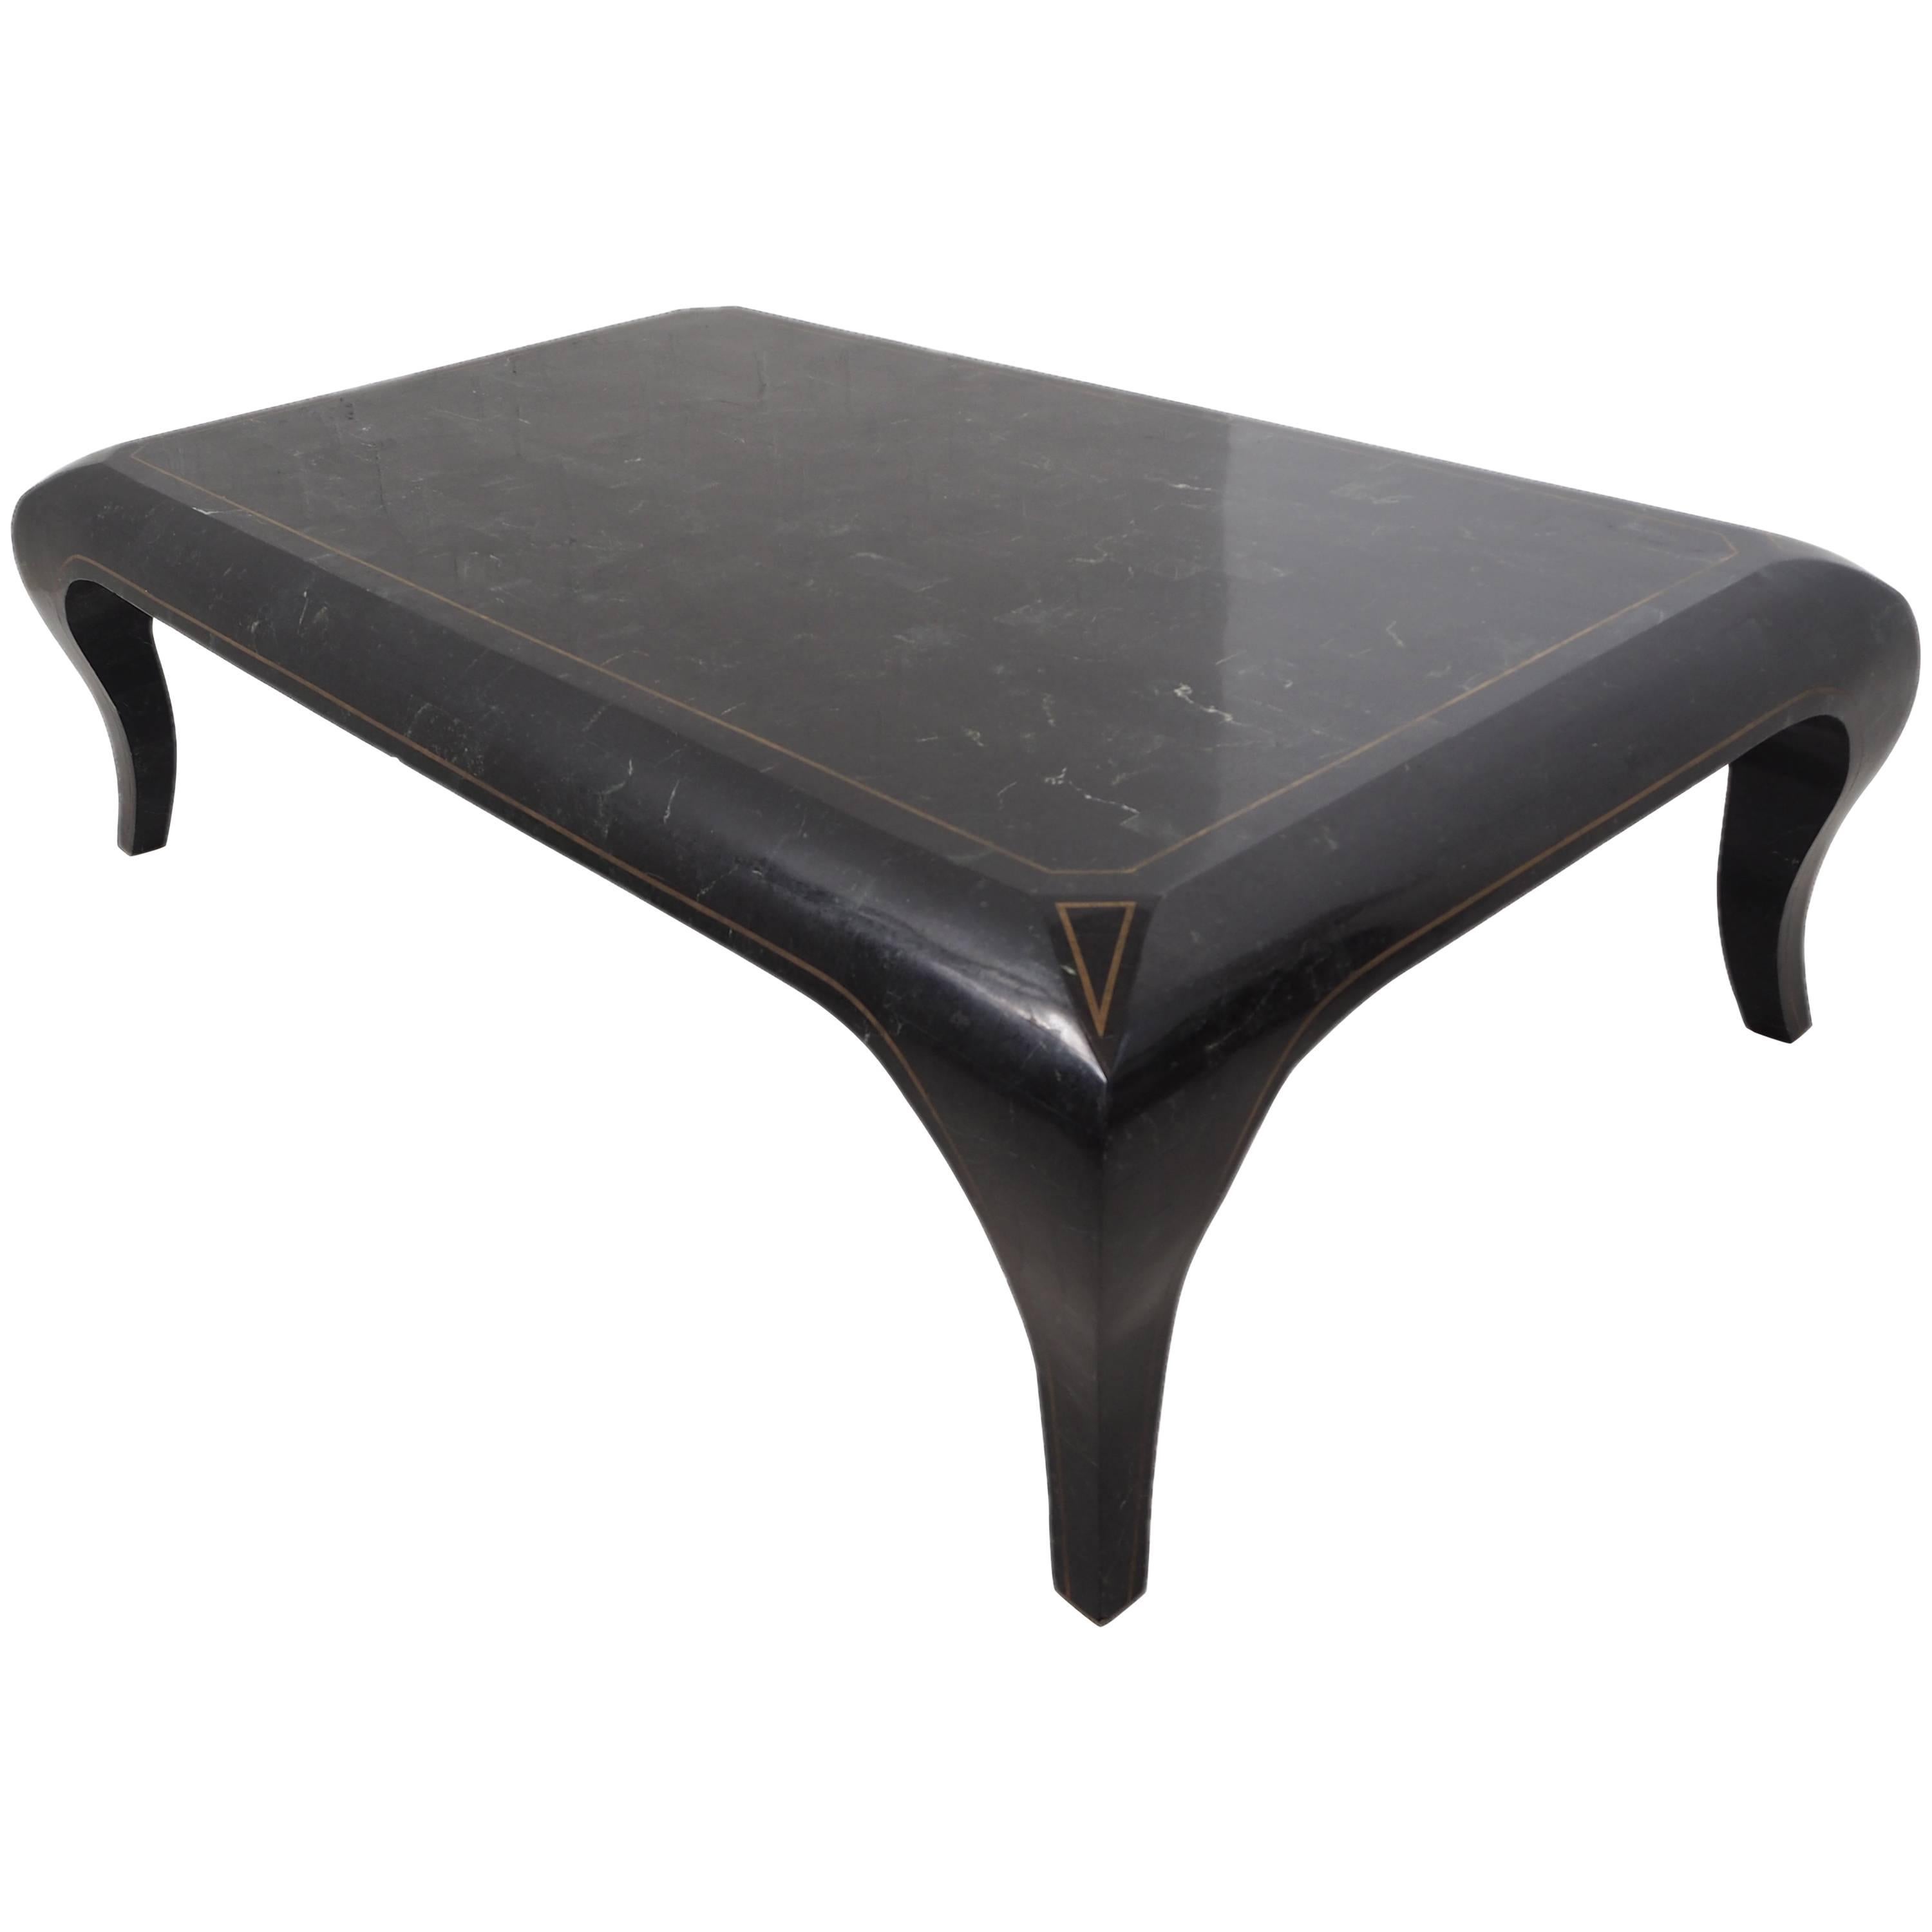 Maitland Smith Tesselated Opium or Coffee Table